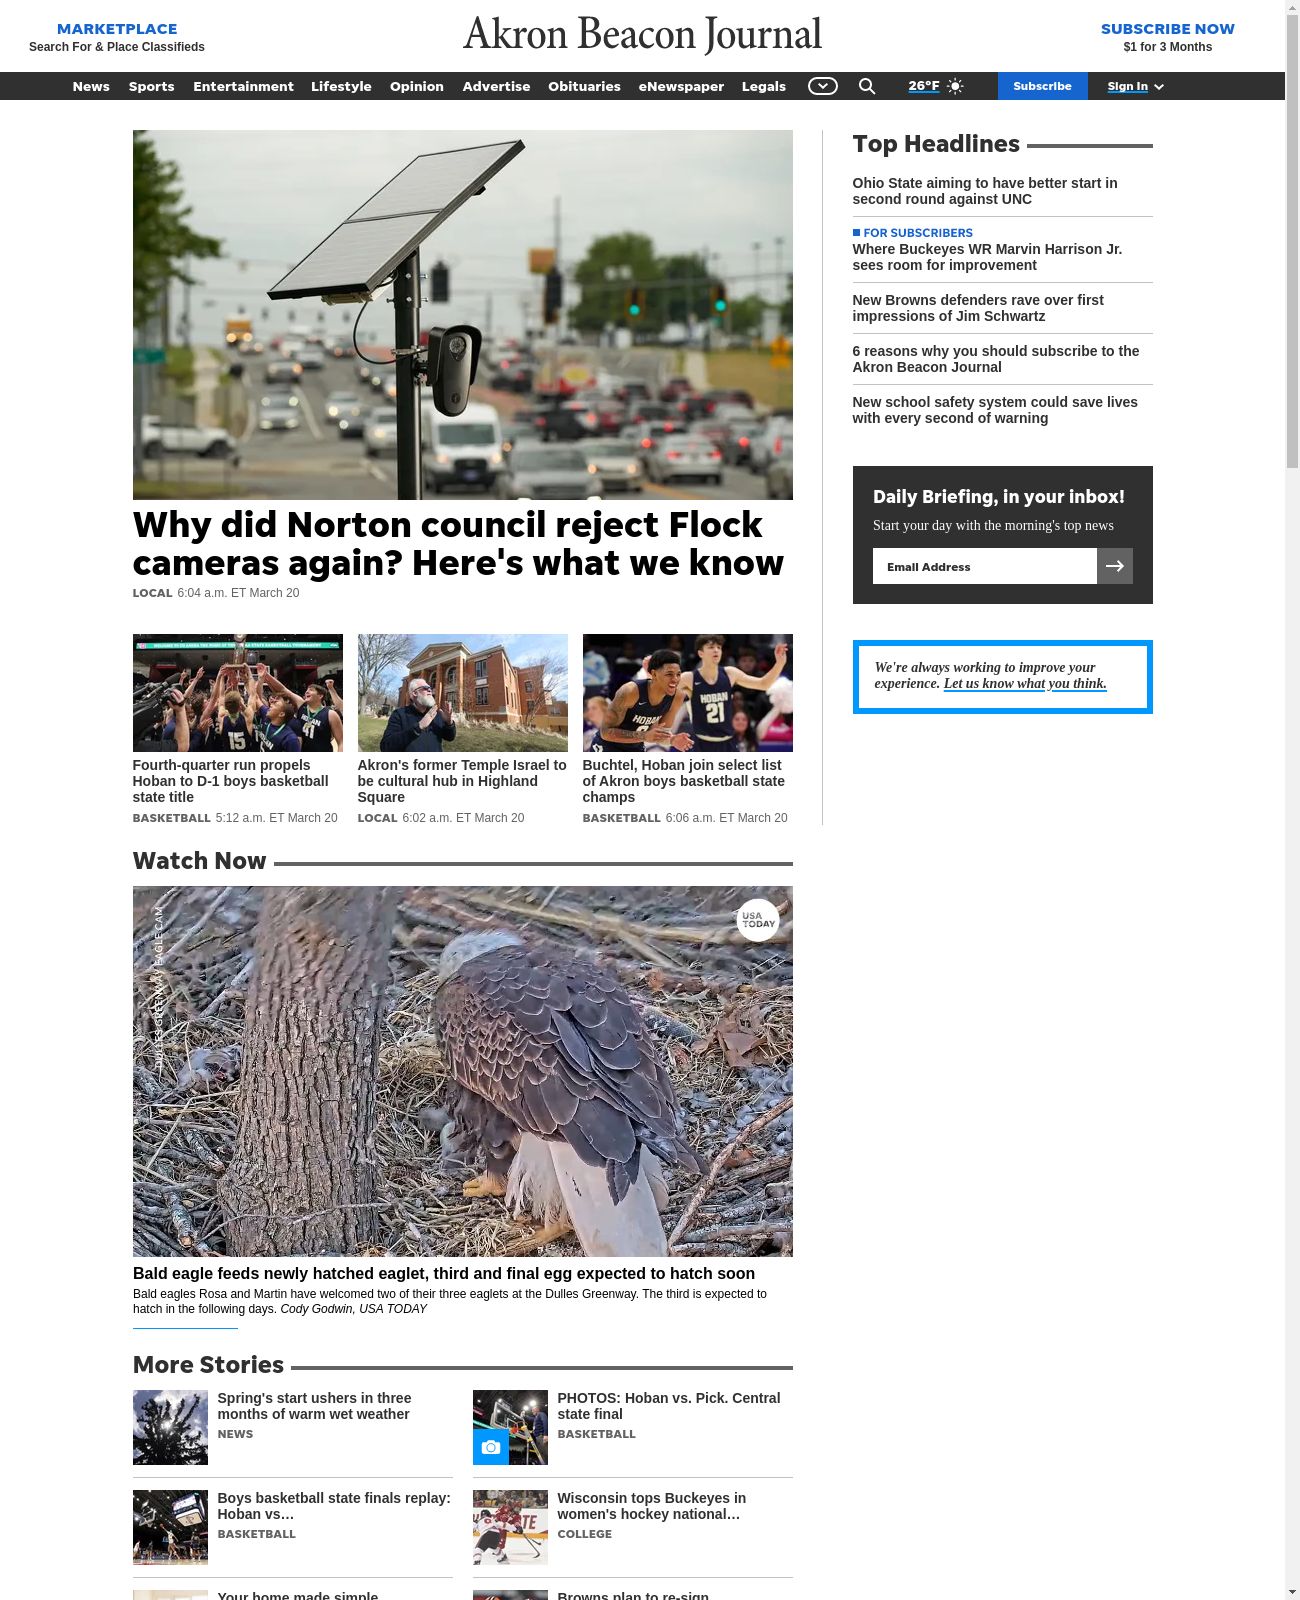 Akron Beacon Journal at 2023-03-20 08:54:21-04:00 local time